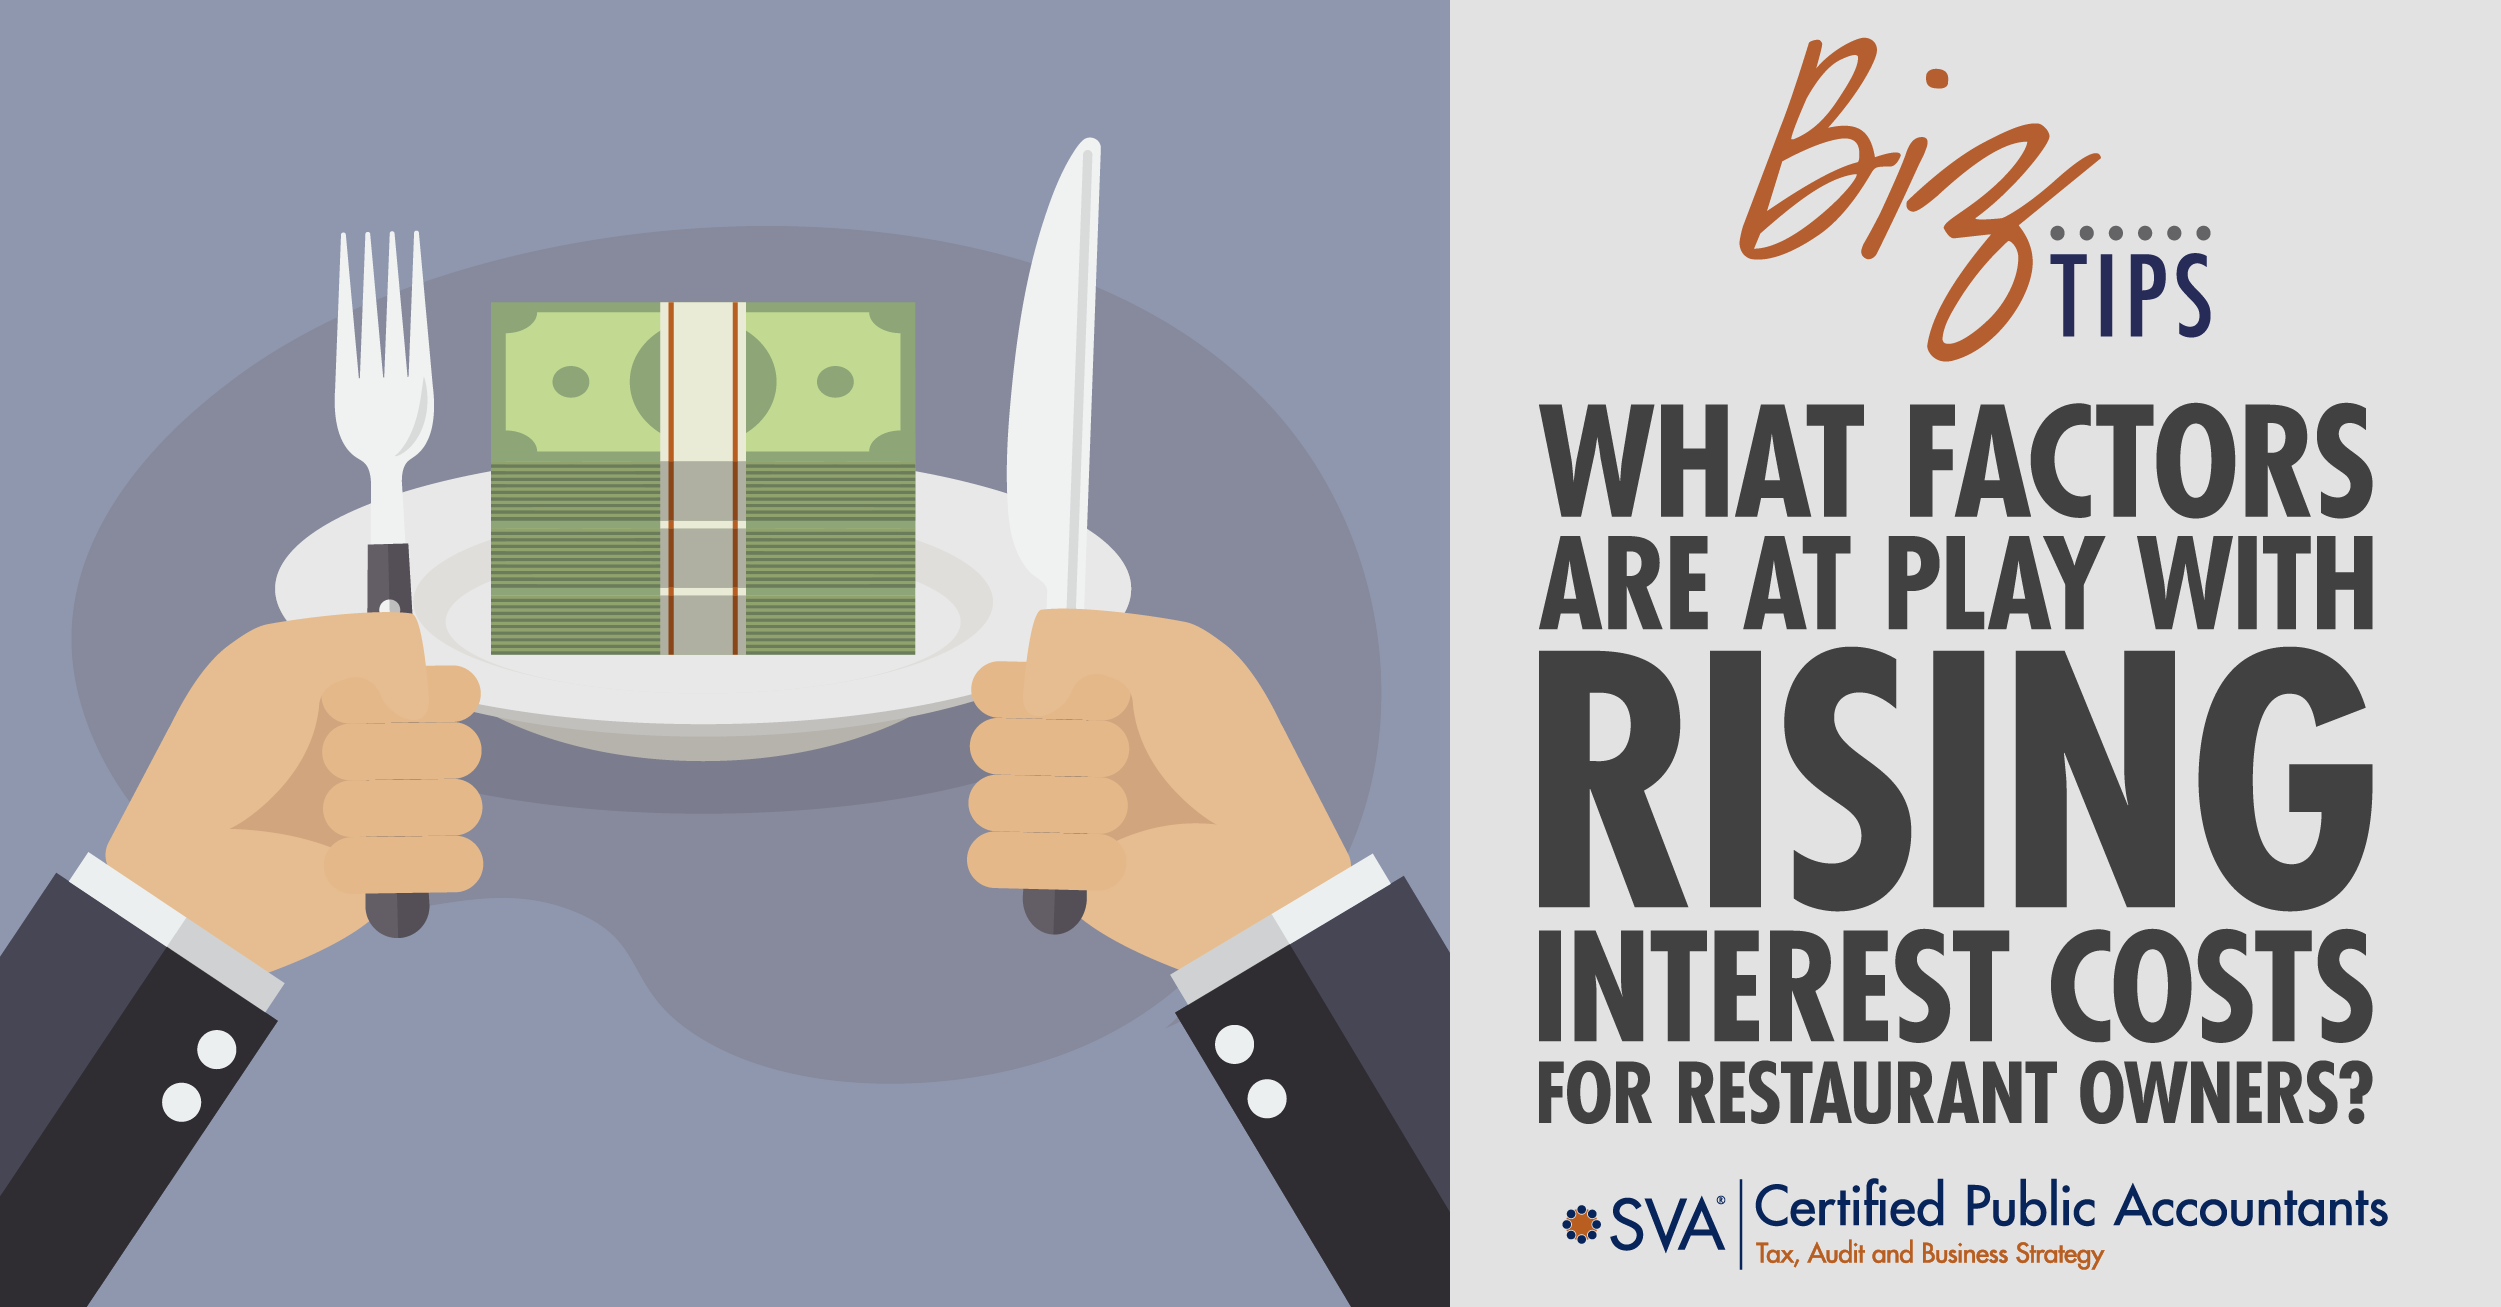 What Factors are at Play With Rising Interest Costs for Restaurant Owners?